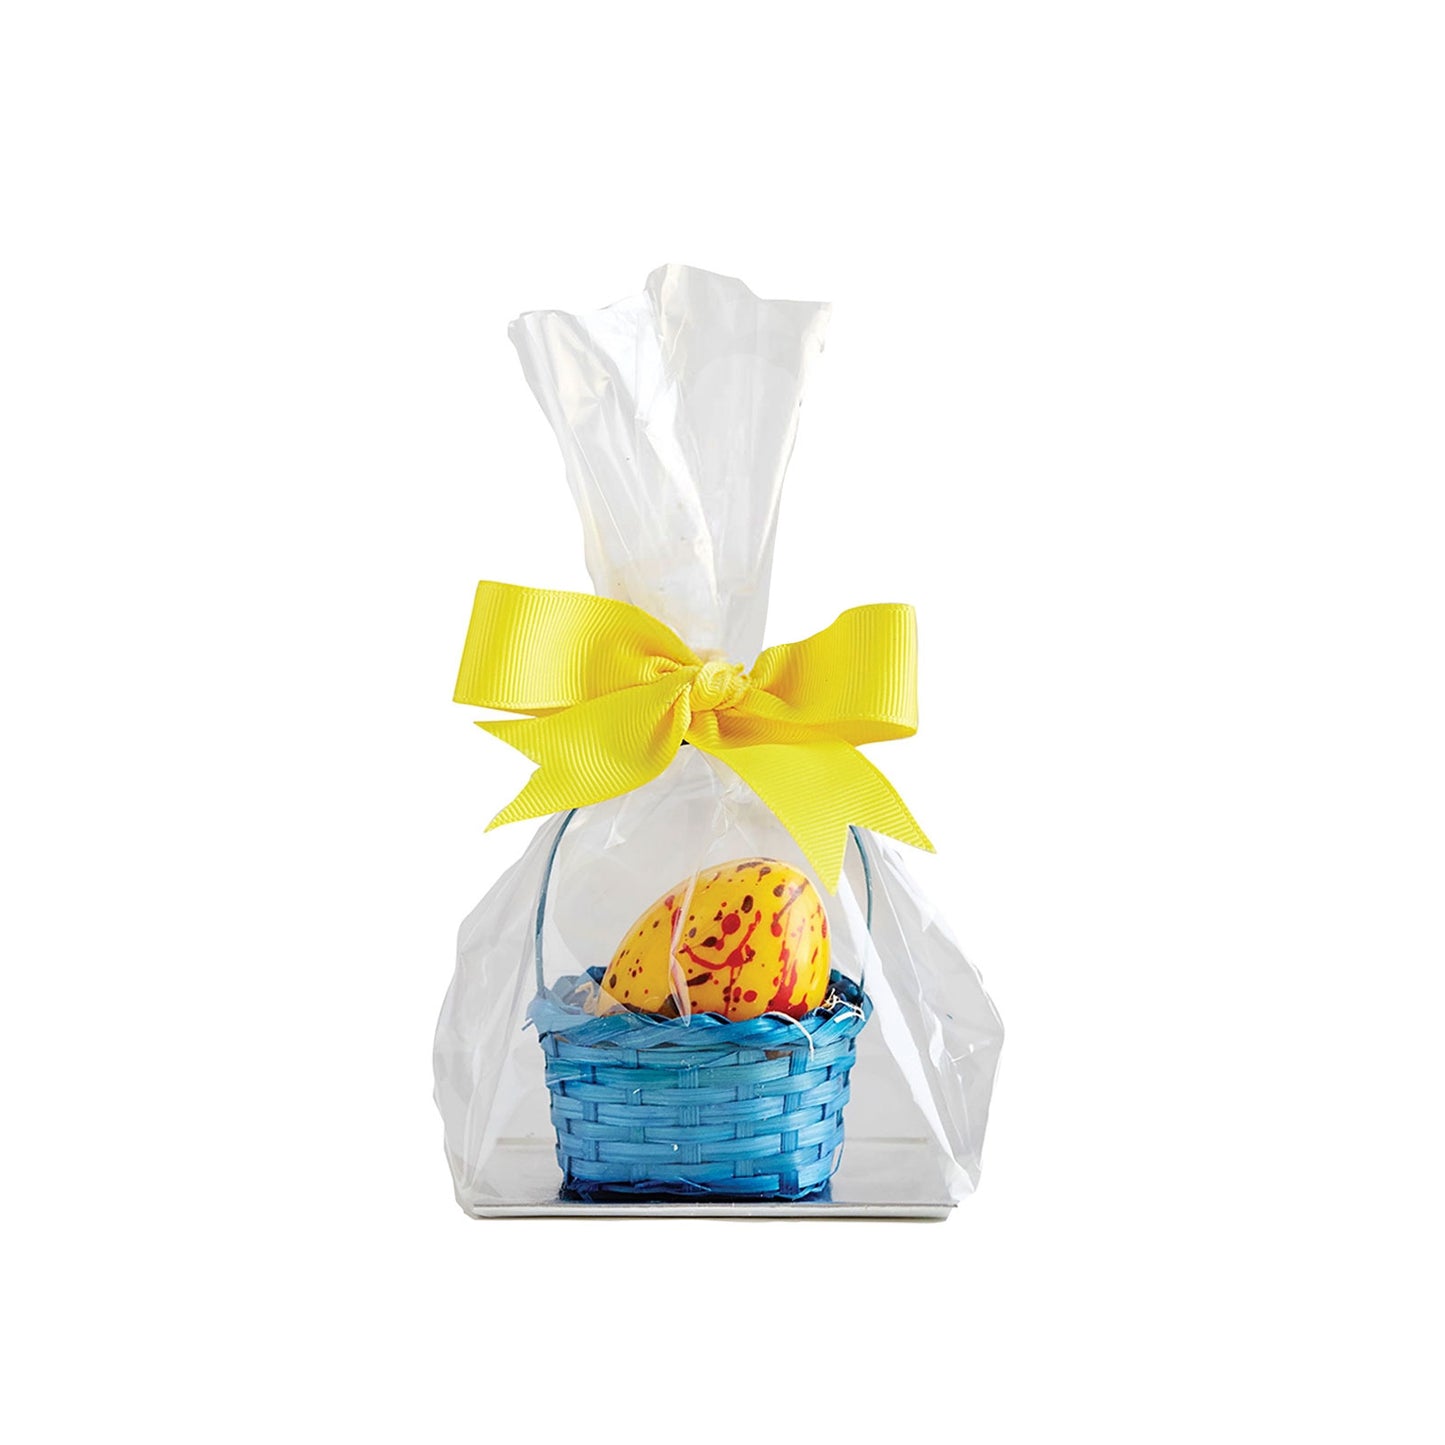 Chocolate Easter Egg in Gift Basket